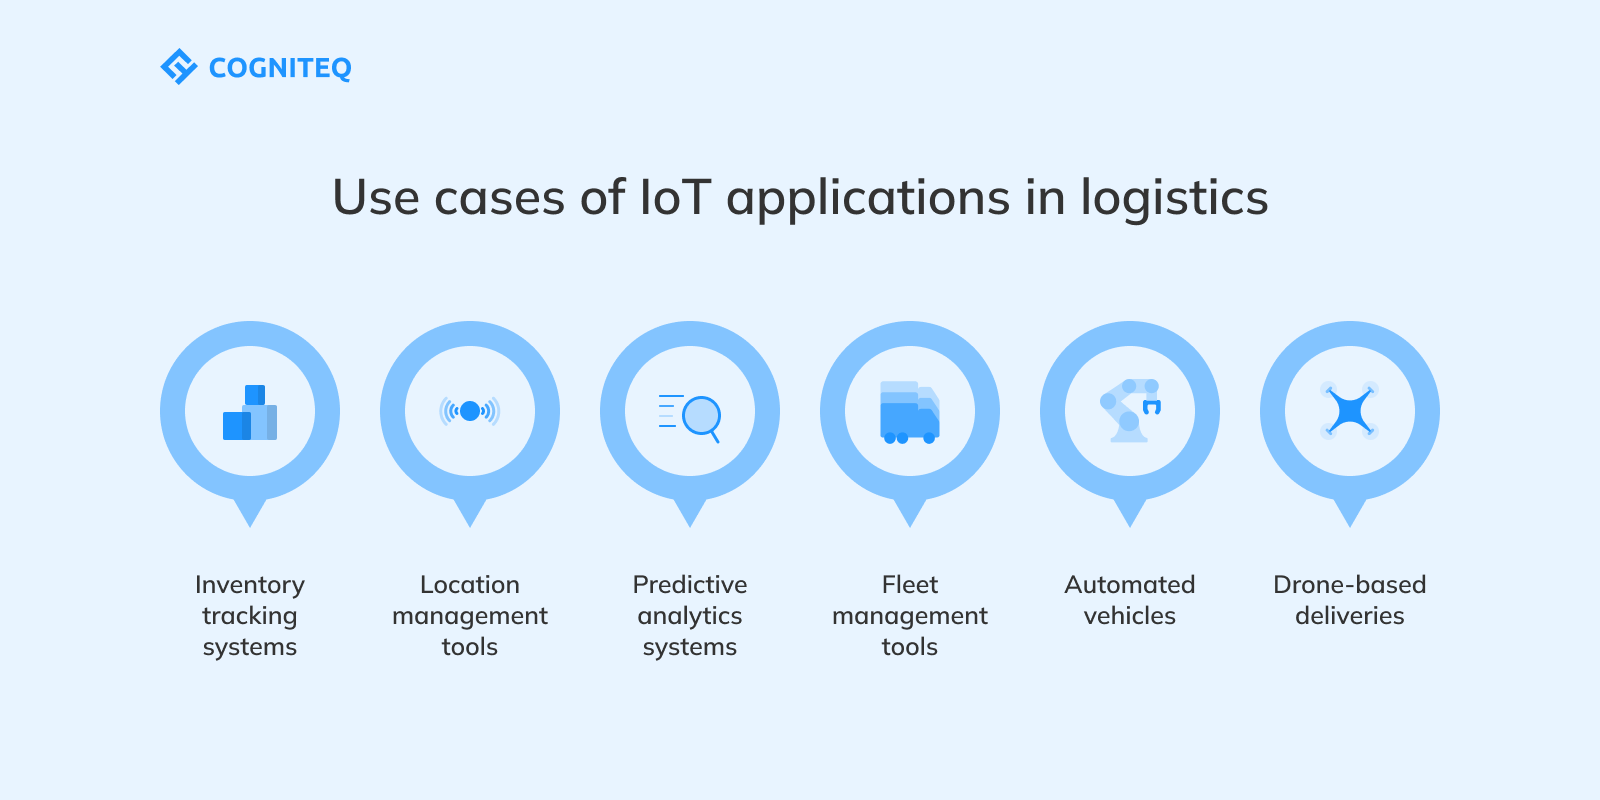 a case study on how iot is used in logistics